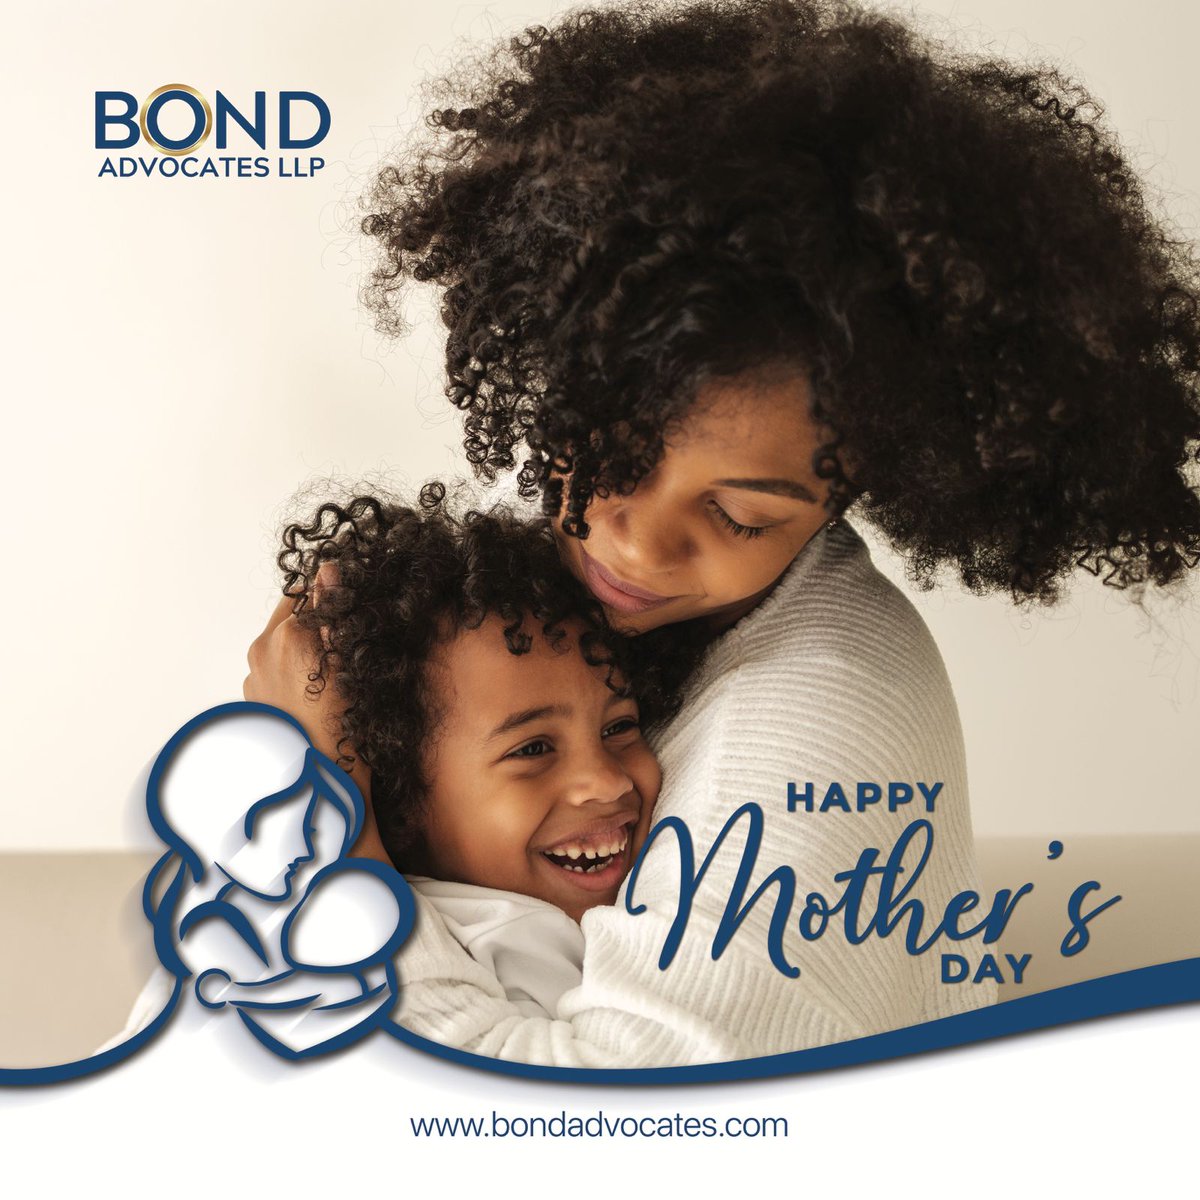 To all the mothers who make our lives brighter and richer, we are grateful for everything you do. Happy Mothers Day. #MothersDay